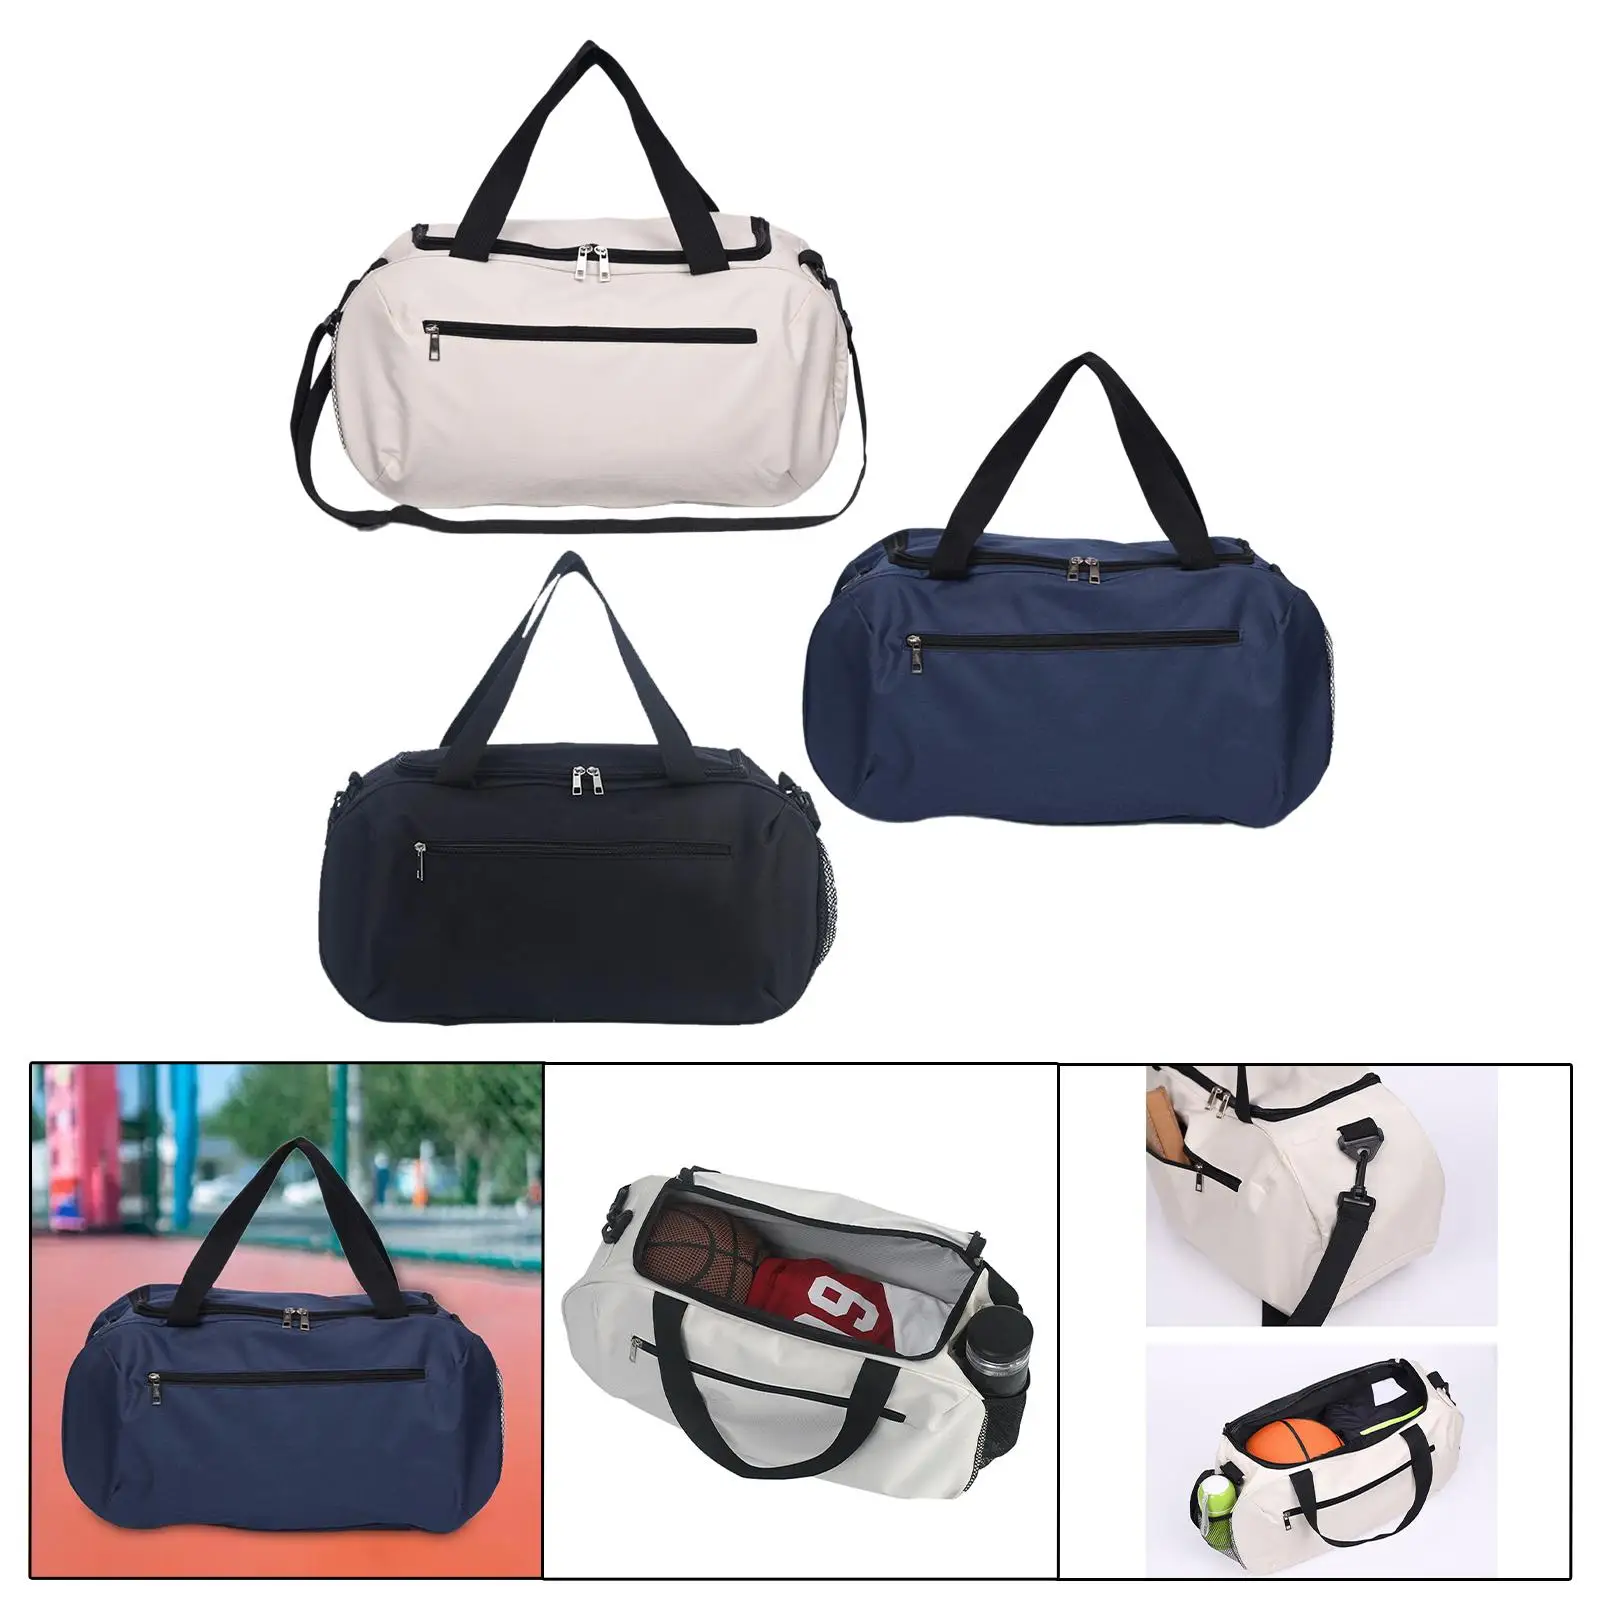 Travel Duffle Bag Fashion Adults Sports Gym Bag for Fitness Camping Exercise